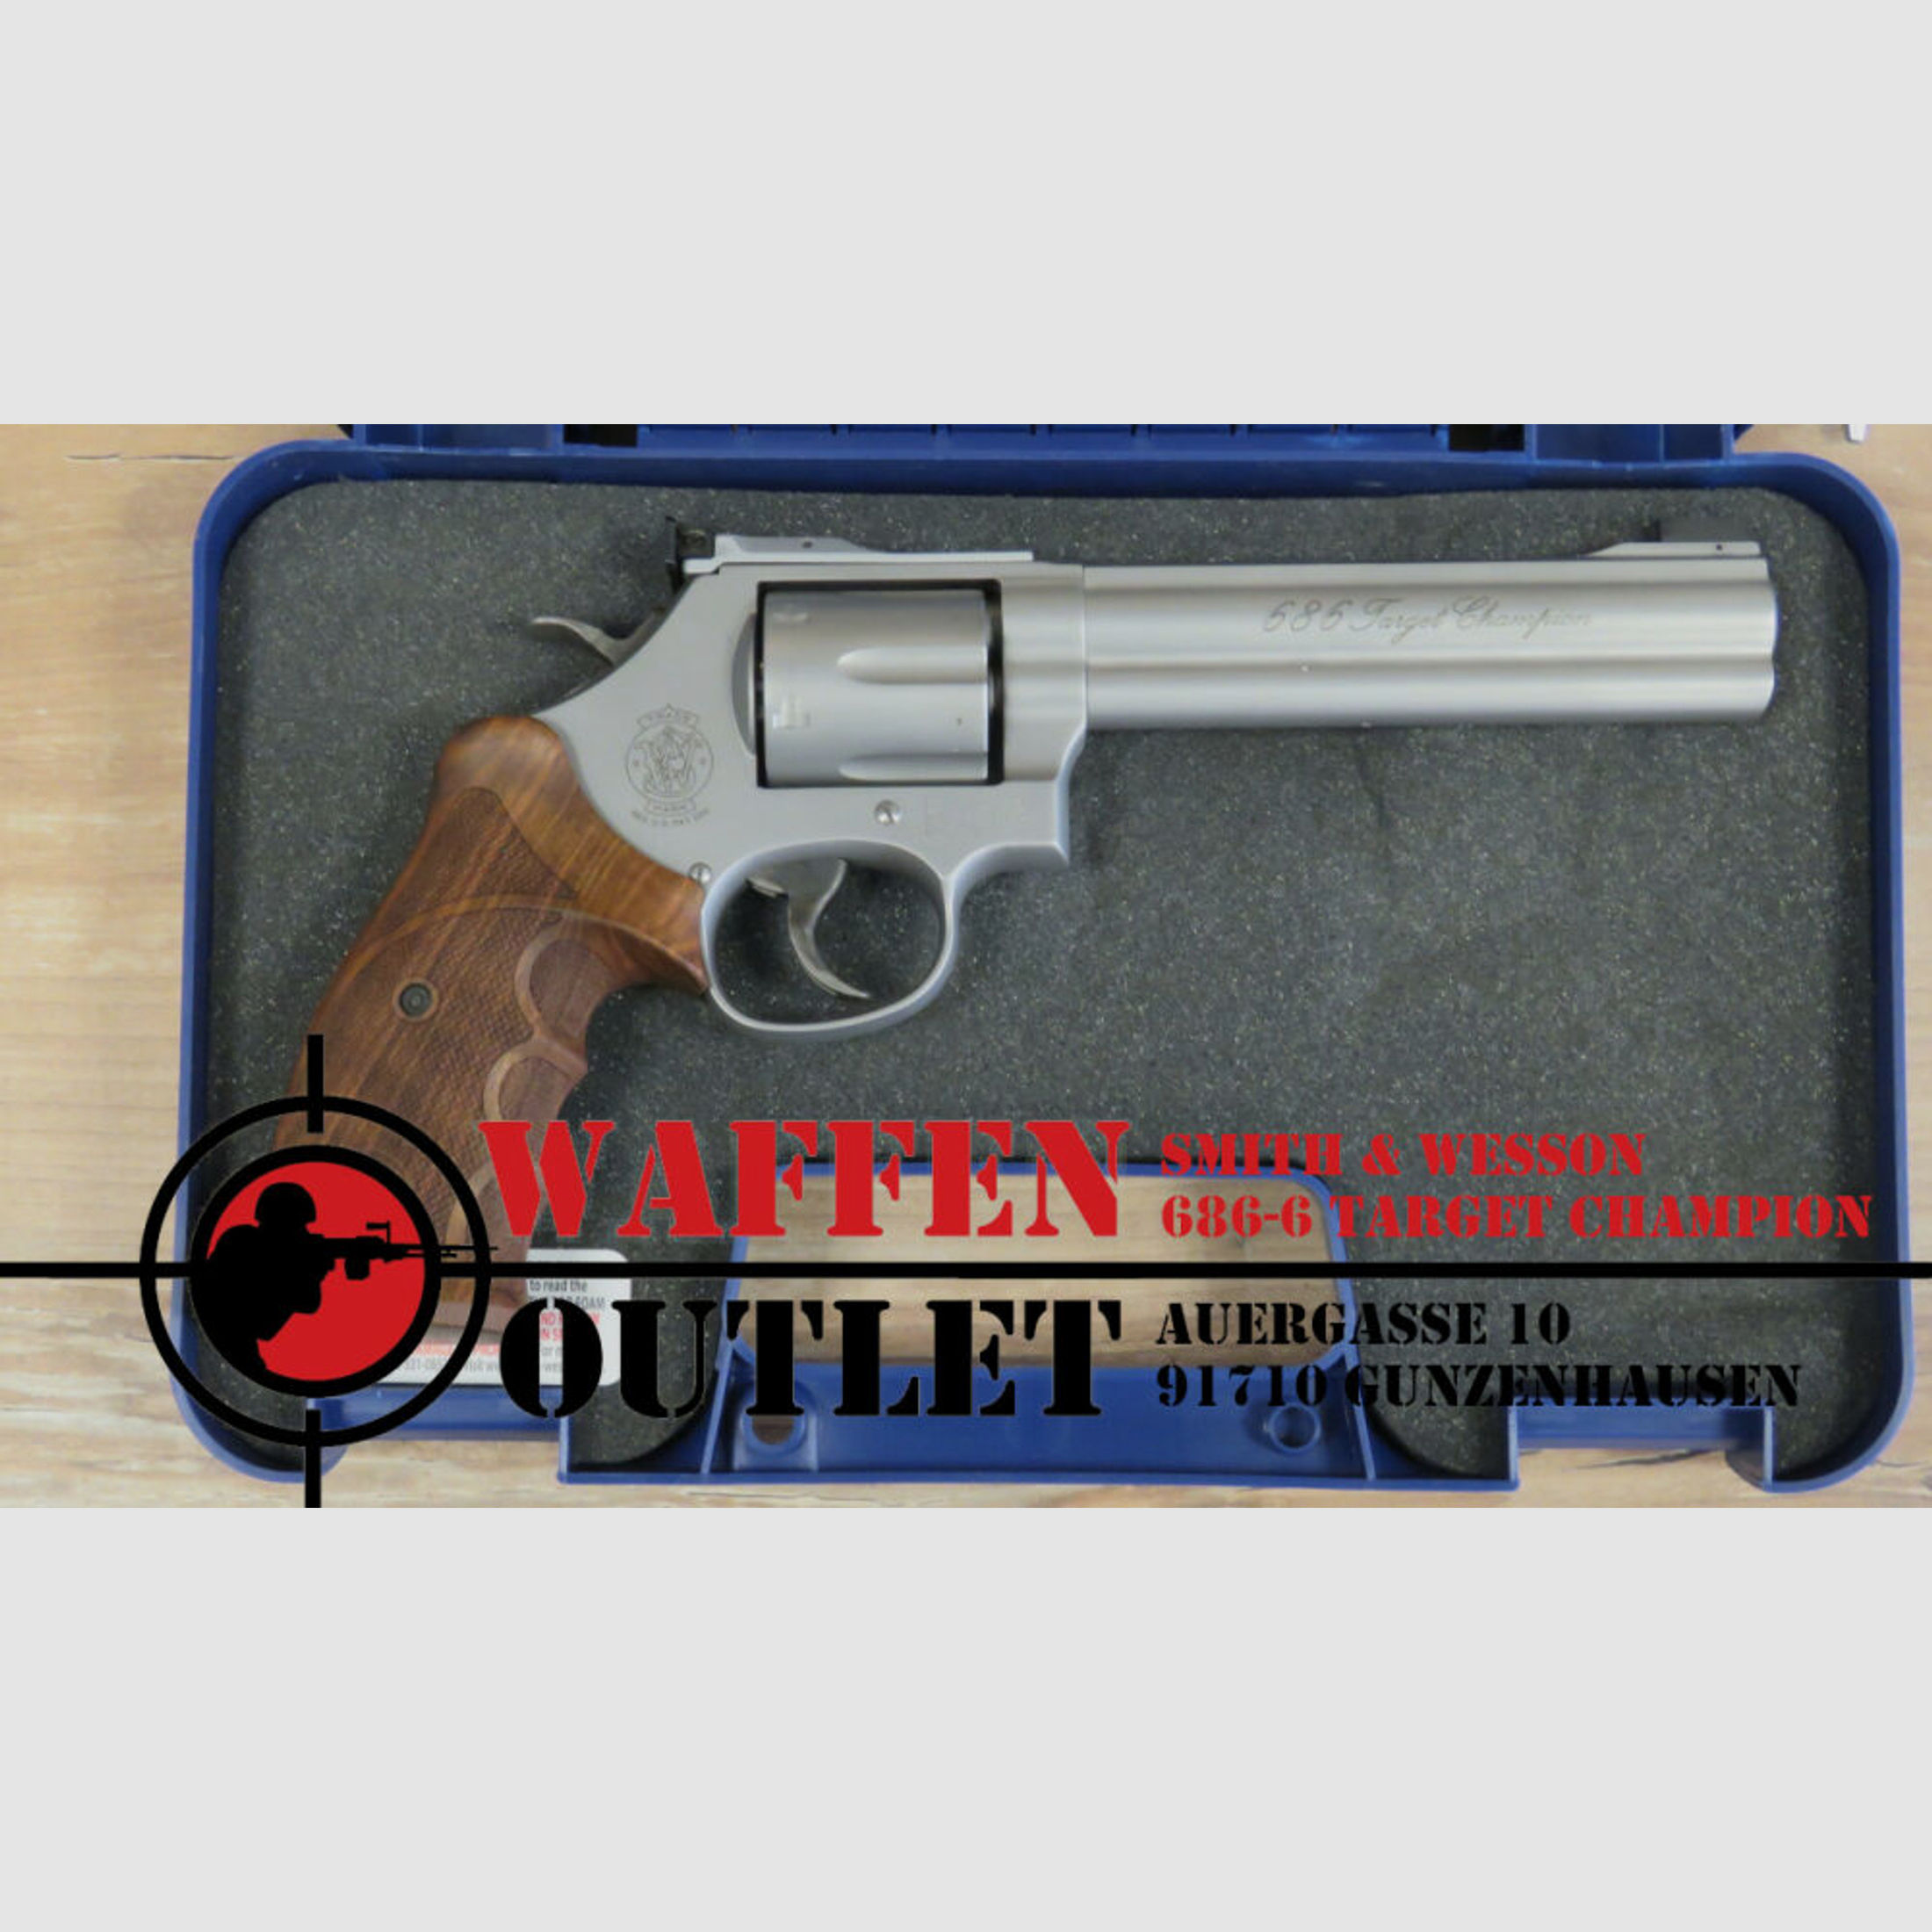 Smith & Wesson	 Model 686-6 Target Champion